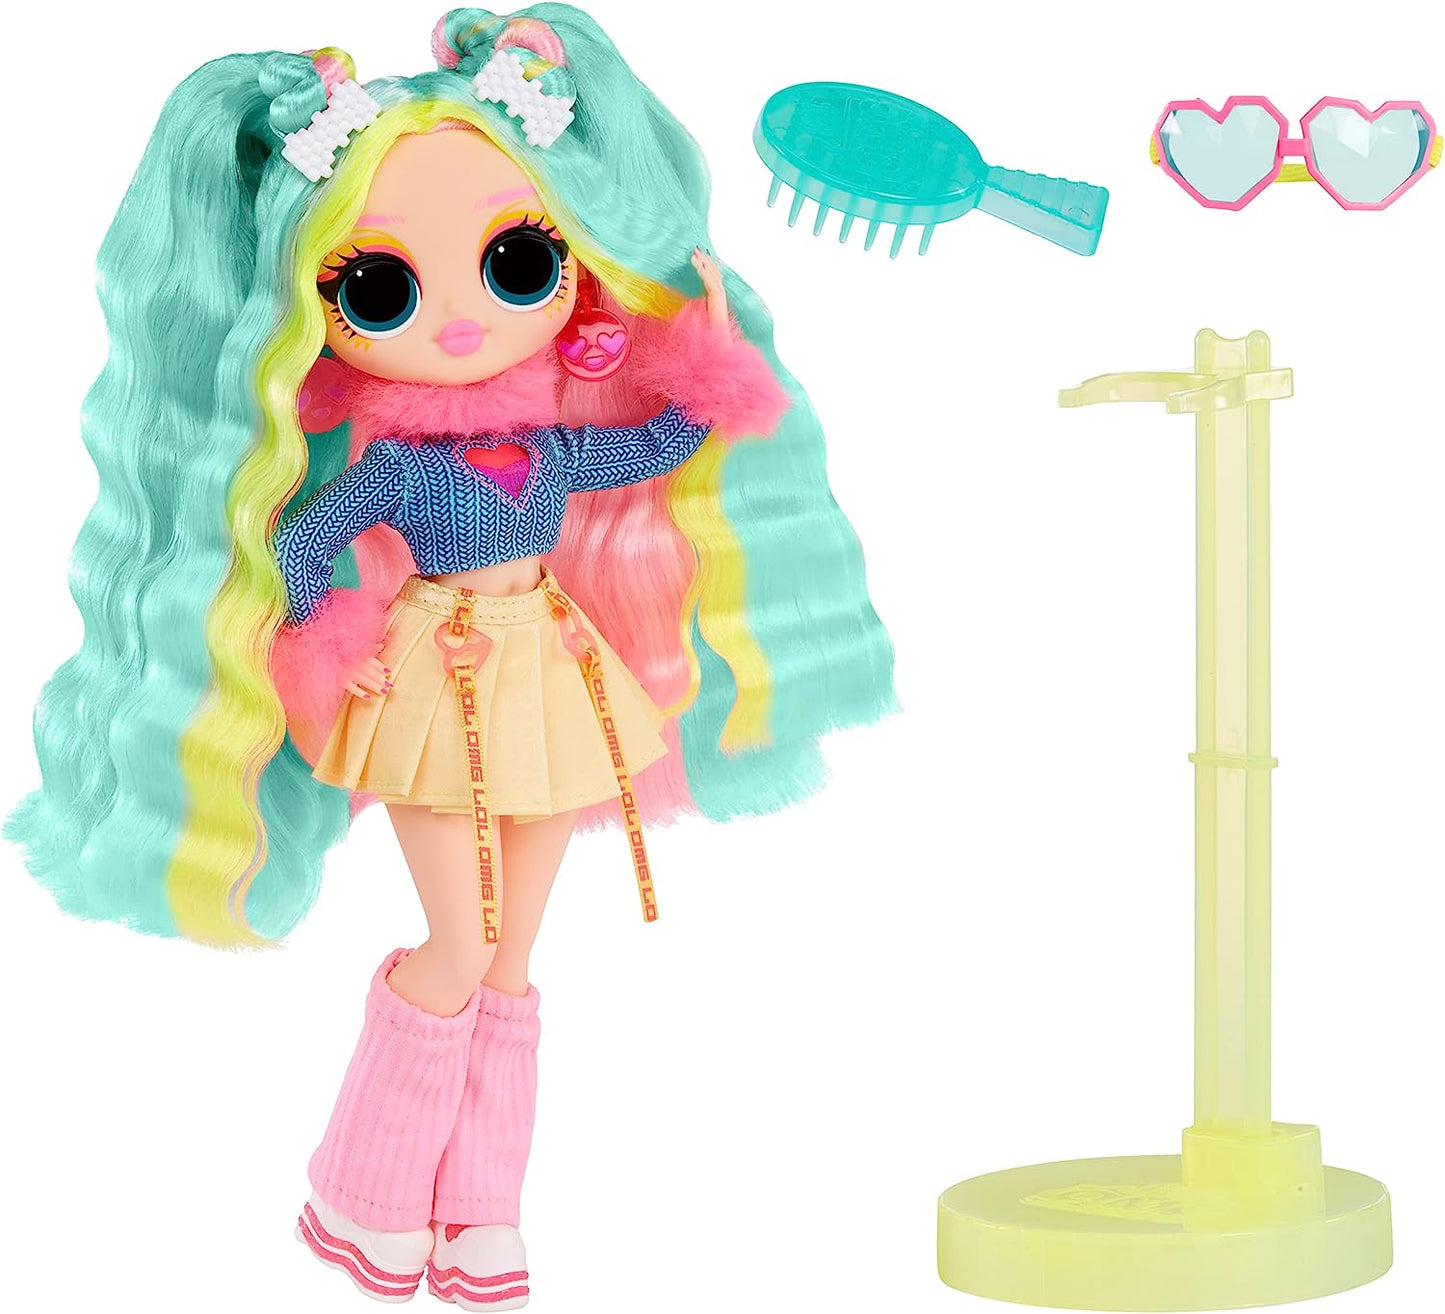 LOL Surprise OMG Sunshine Color Change Bubblegum DJ Fashion Doll with Color Changing Hair and Fashions and Multiple Surprises – Great Gift for Kids Ages 4+